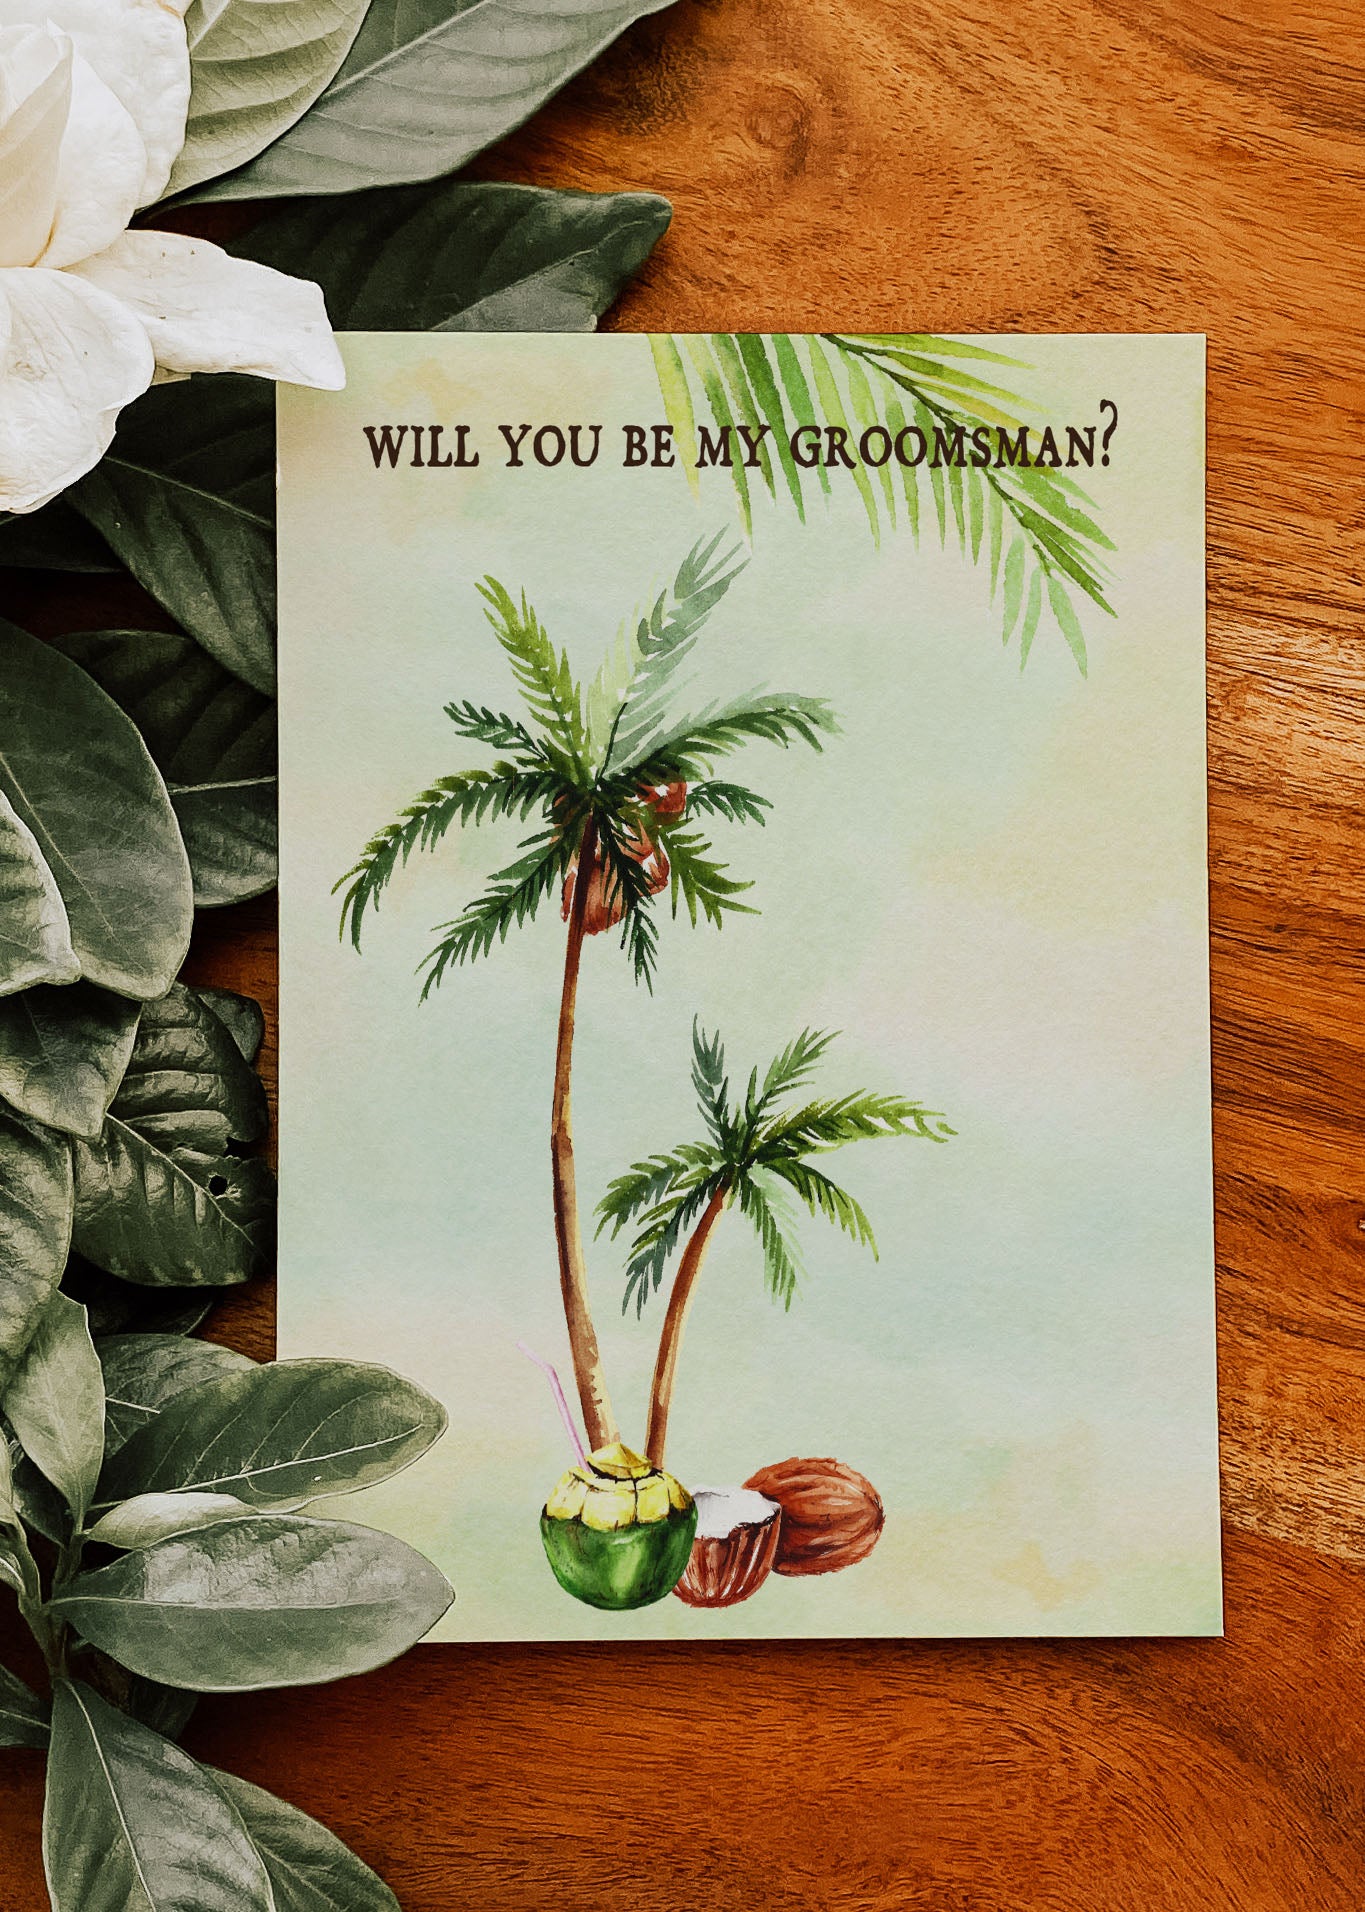 Tropical Floral Watercolor Beach Destination "Will you be my Groomsman" Digital "Instant Download" Invitation 2 - 'TROPICAL LUSH"